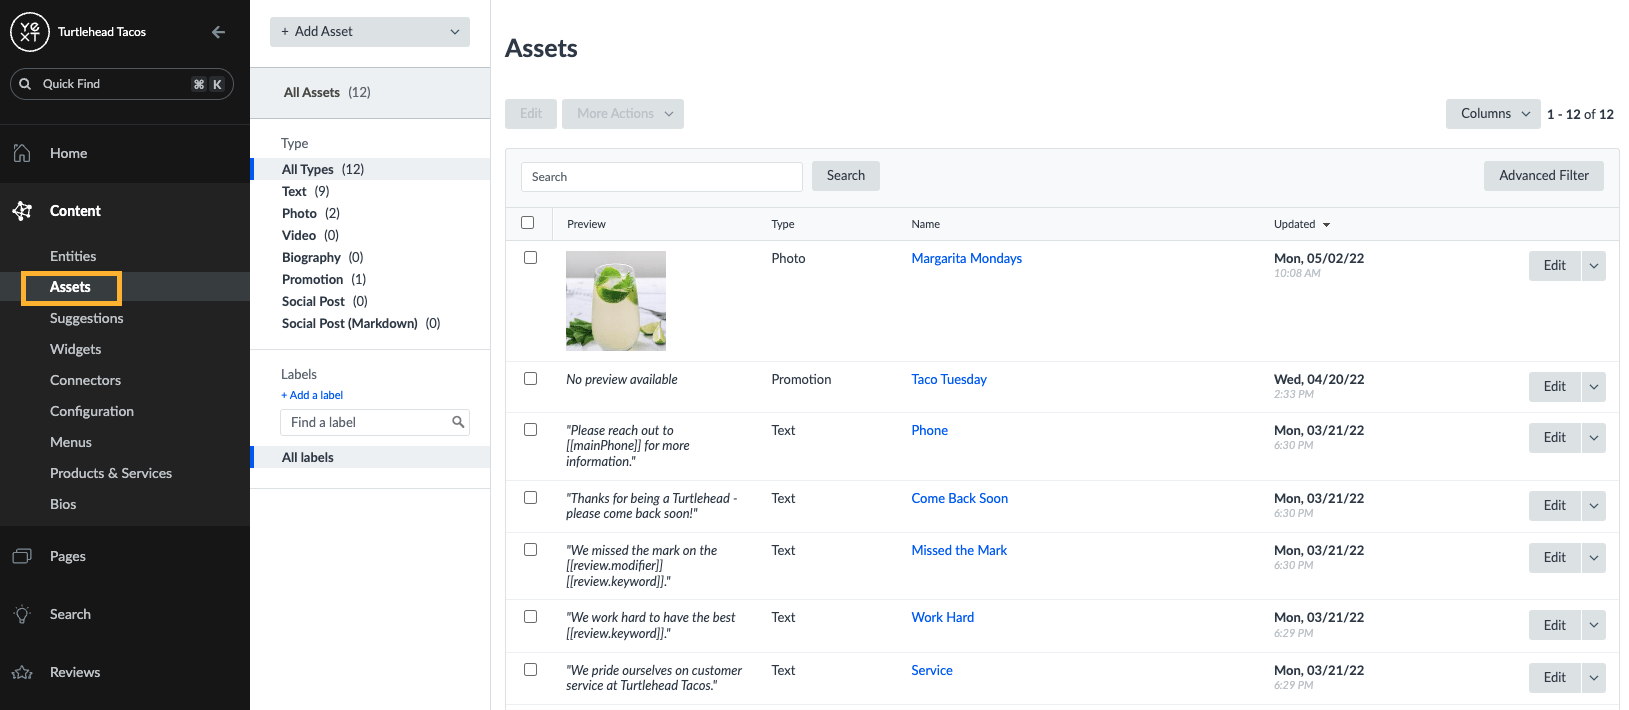 Manage Assets screen